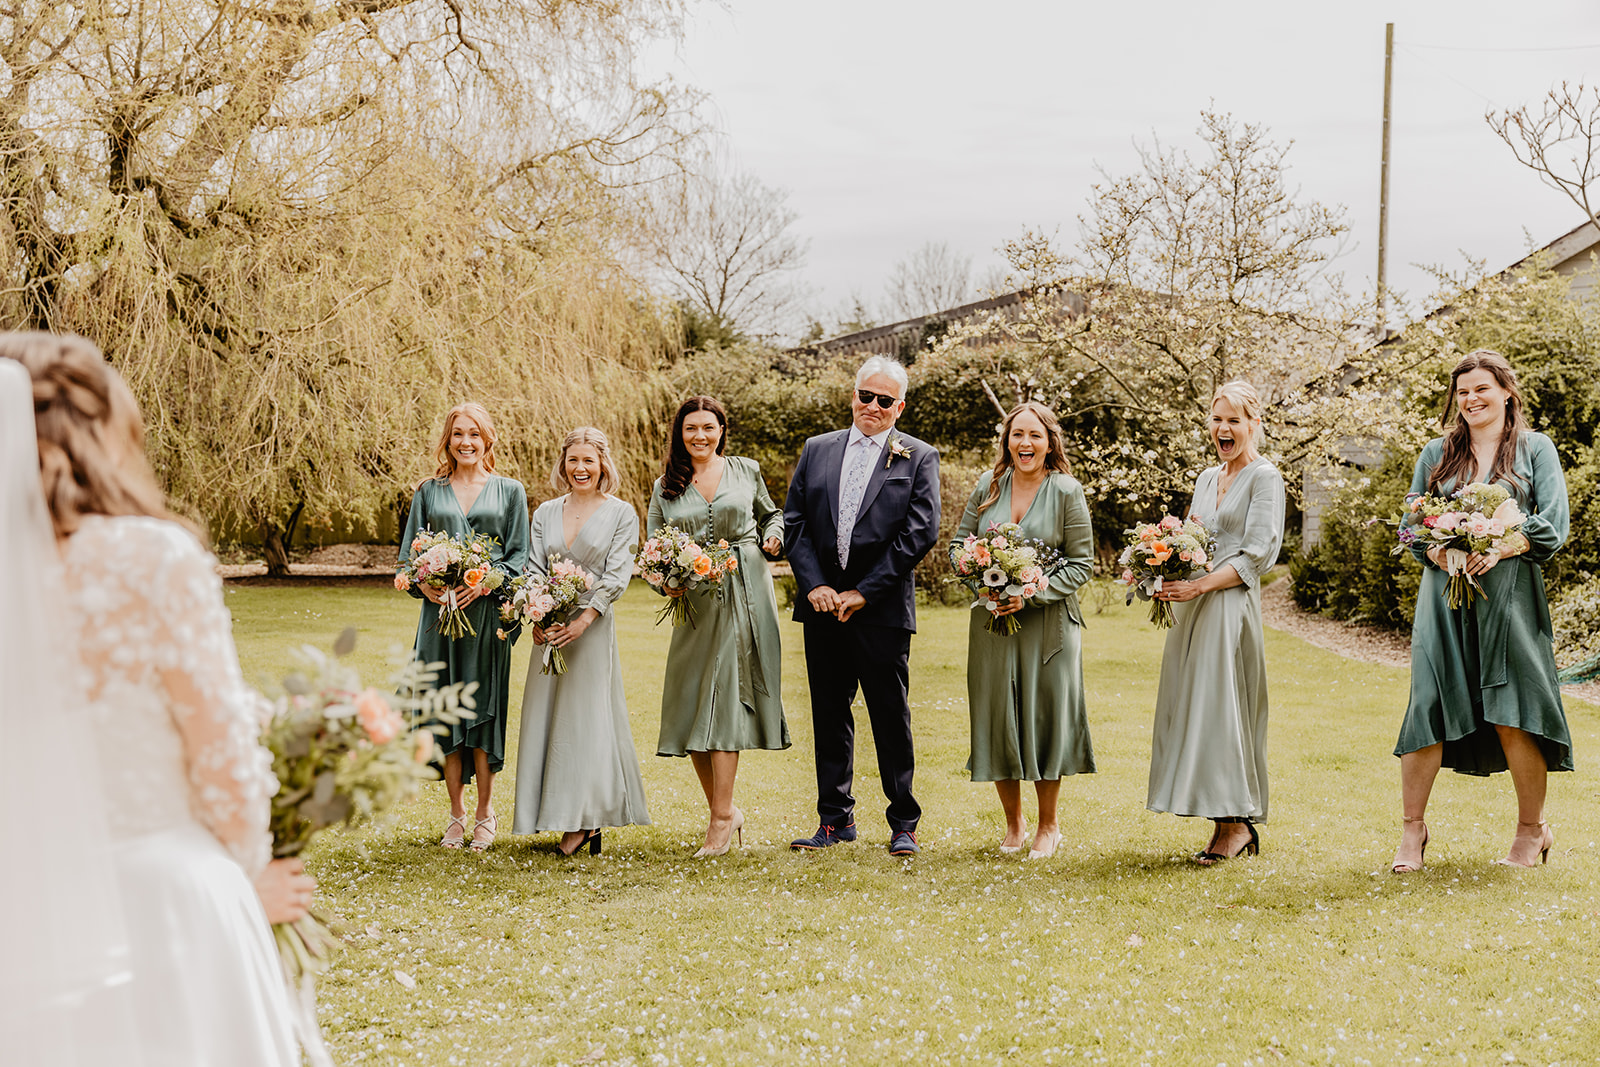 Bridal party at a Secret Barn Wedding, West Sussex. By Olive Joy Photography